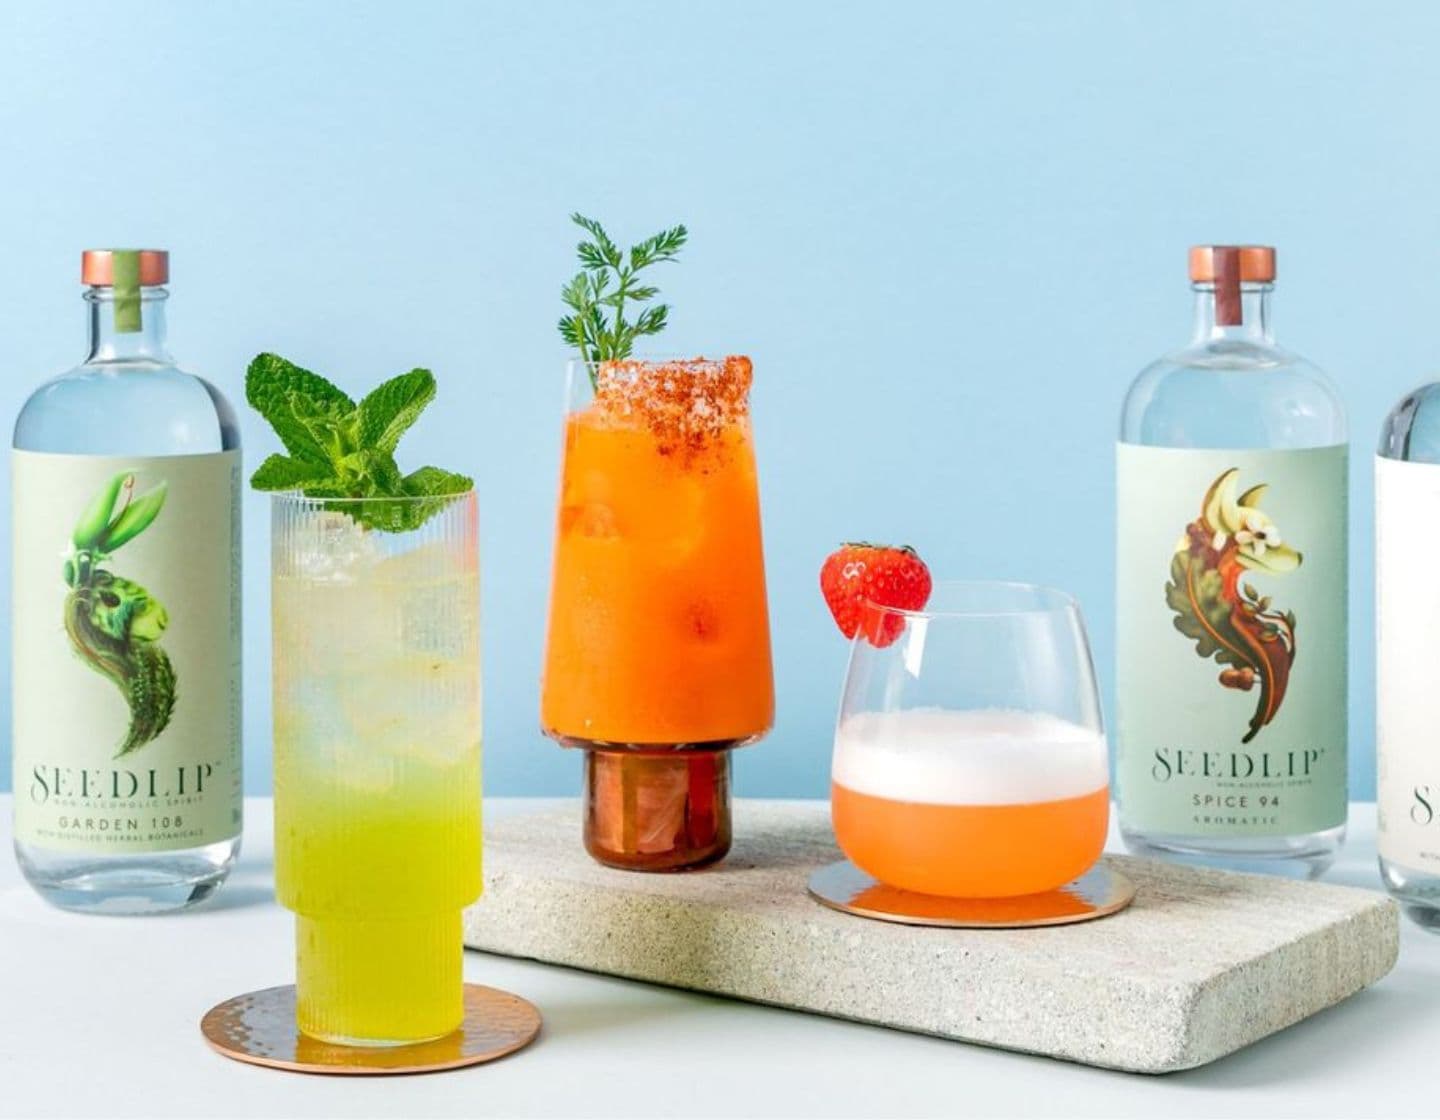 Selection of Seedlip bottles on table surrounded by assorted cocktails